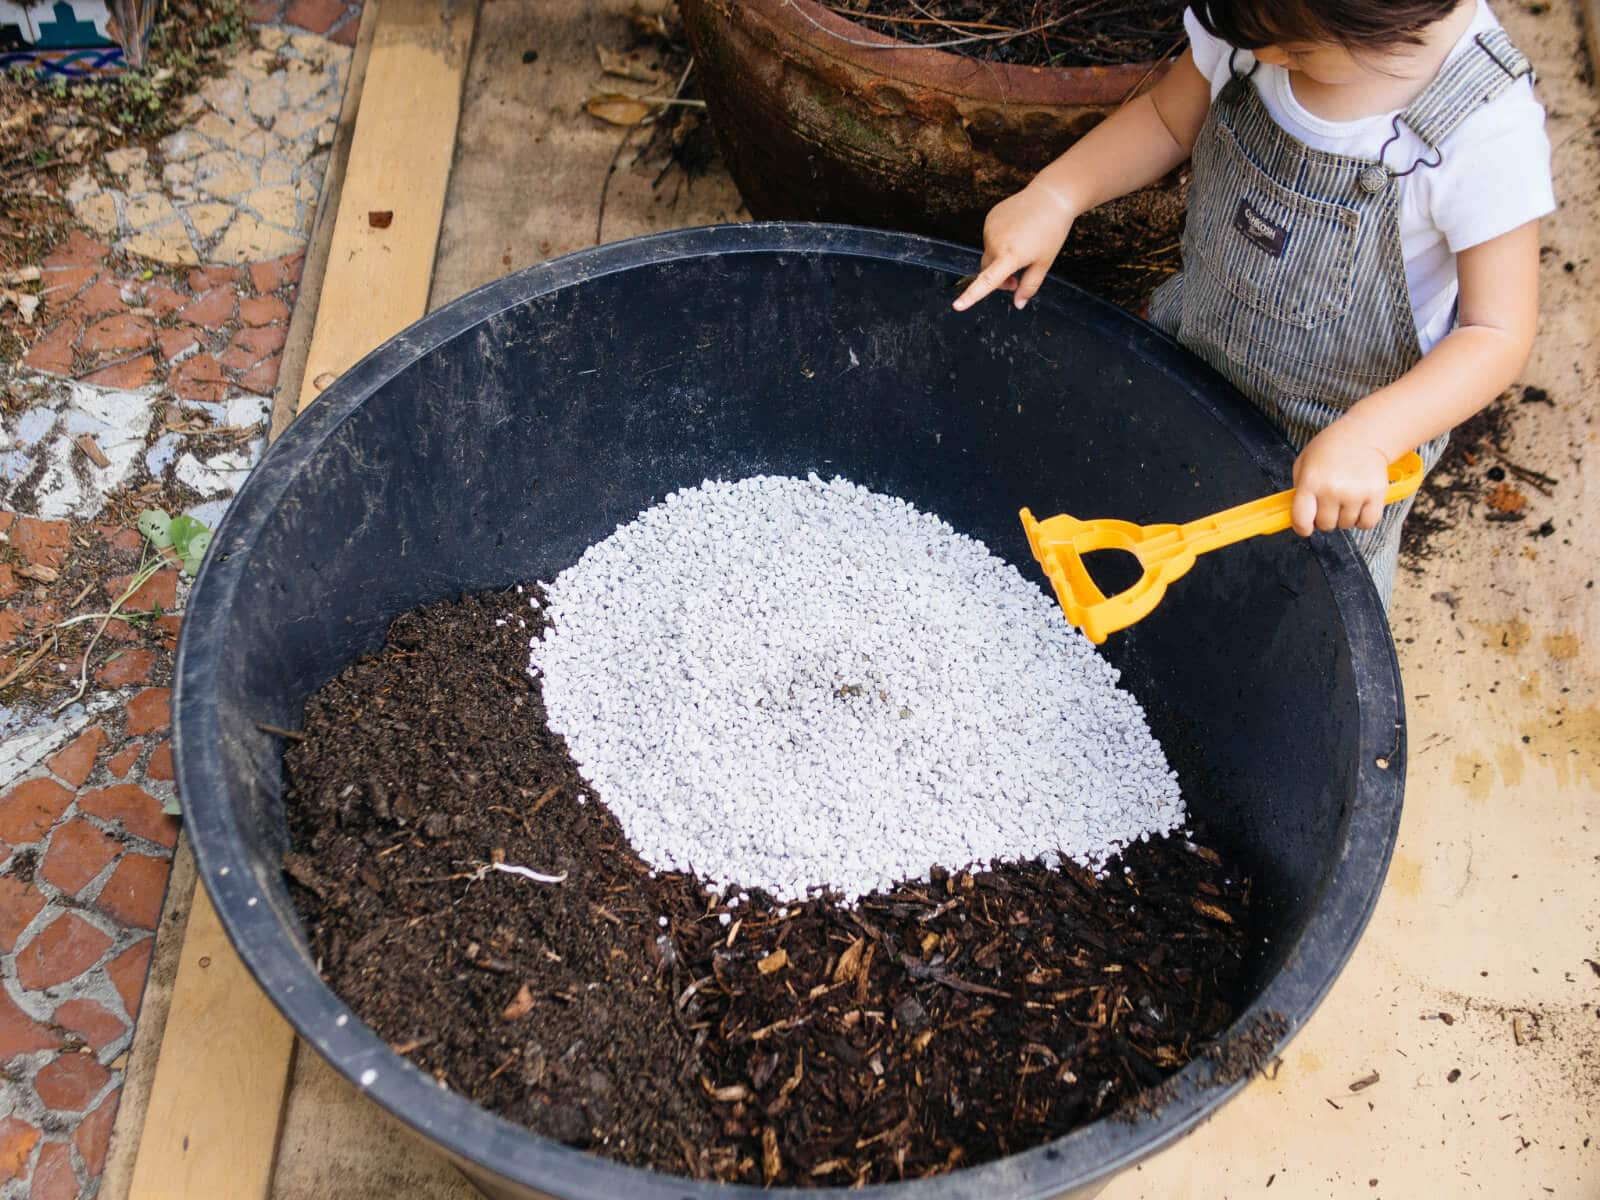 Add perlite to soil mixes for aeration and drainage